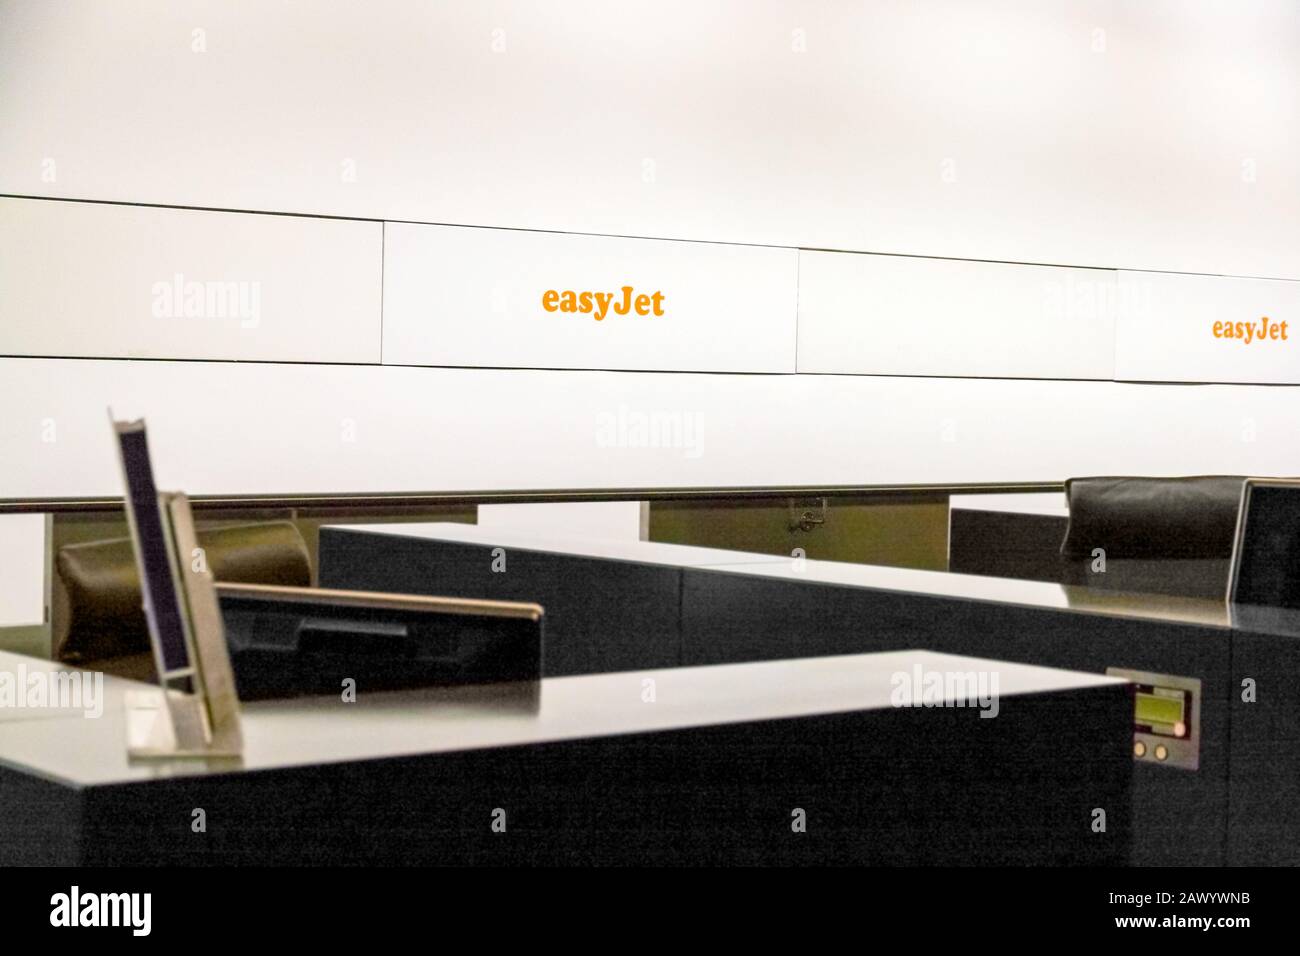 Zurich, Switzerland - June 11, 2017: Check-in counter of airline company easyjet at airport Zurich Stock Photo